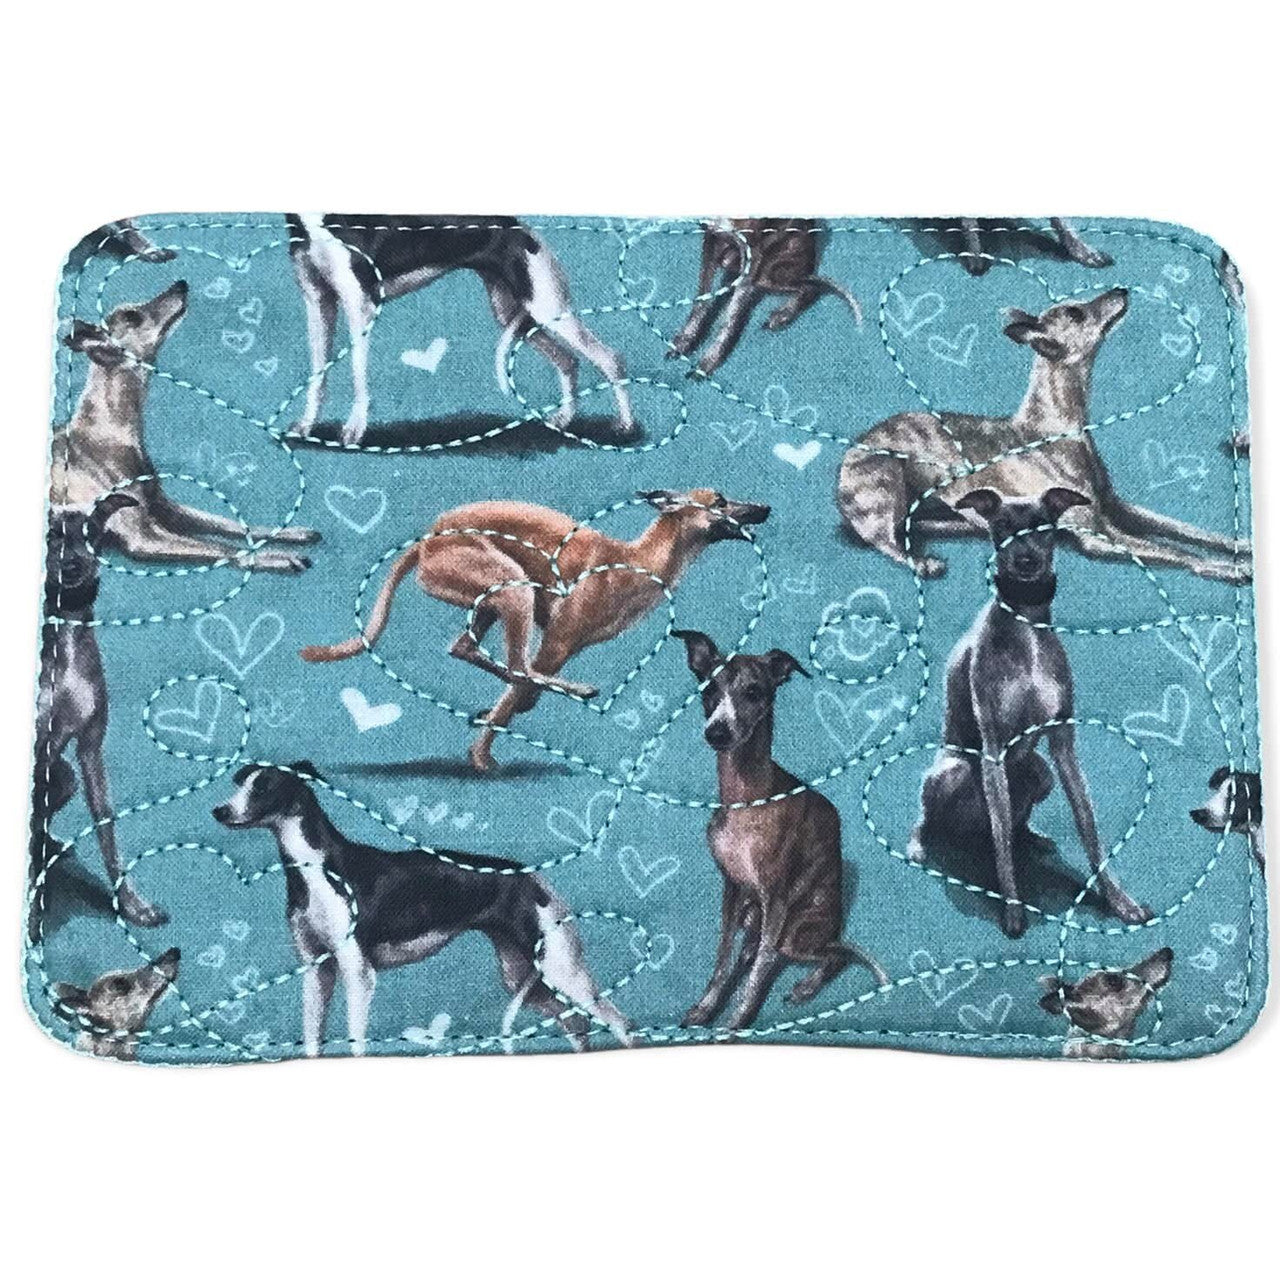 Mug Rug - Sighthound Love Whippets Italian Greyhounds Quilted Hearts